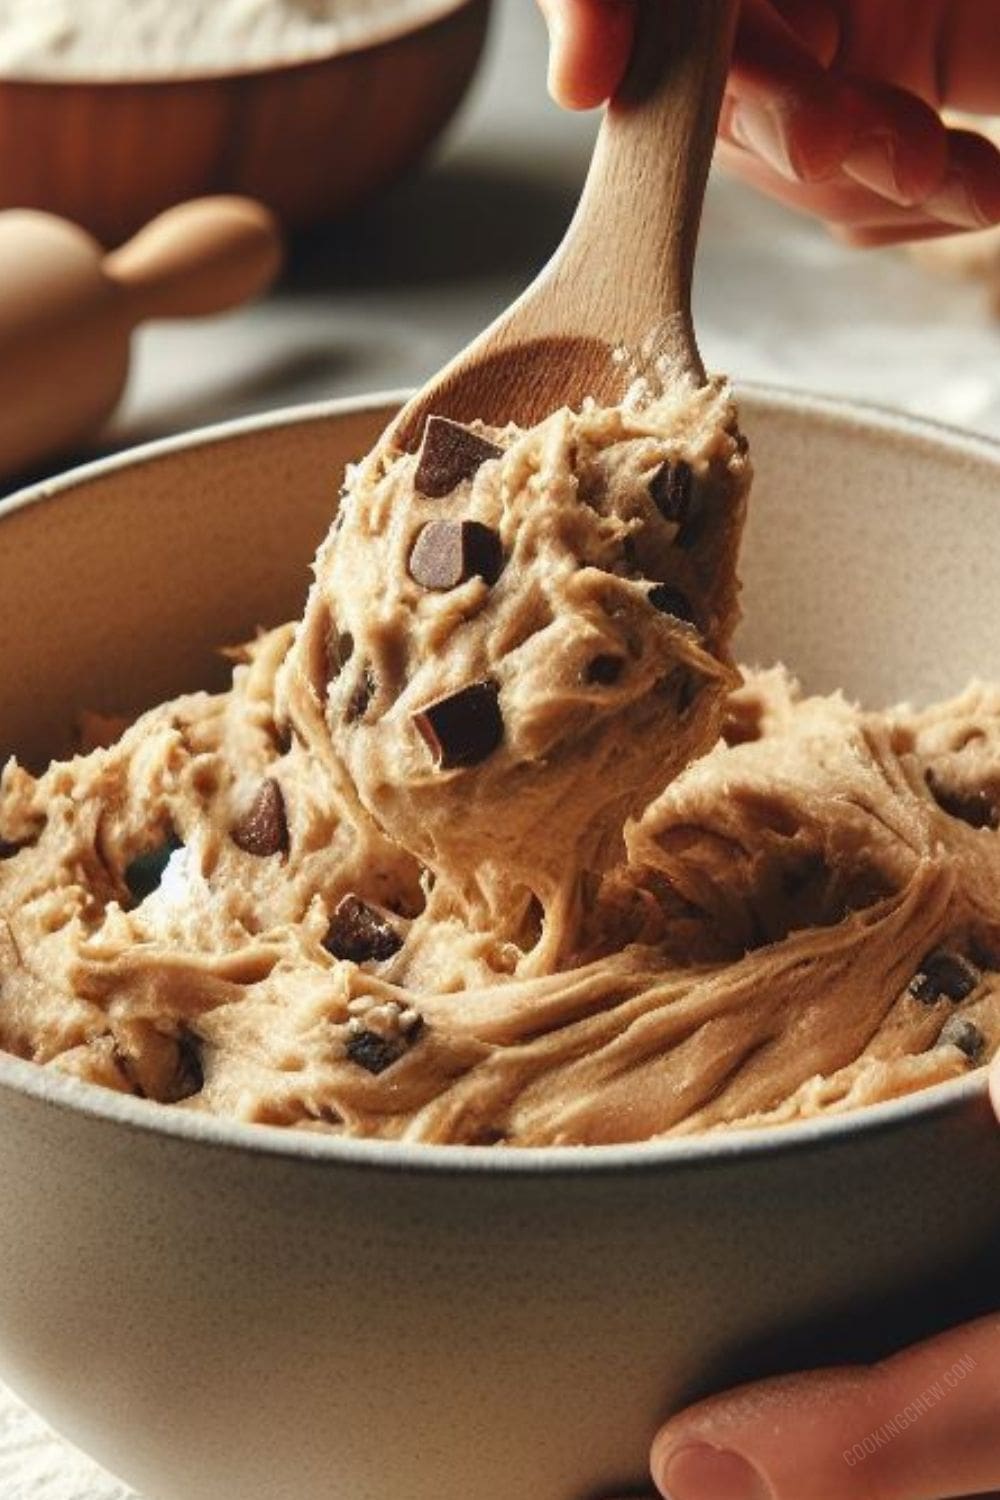 A hand mixing chocolate chip cookie dough with a wooden spoon in a stainless steel bowl.